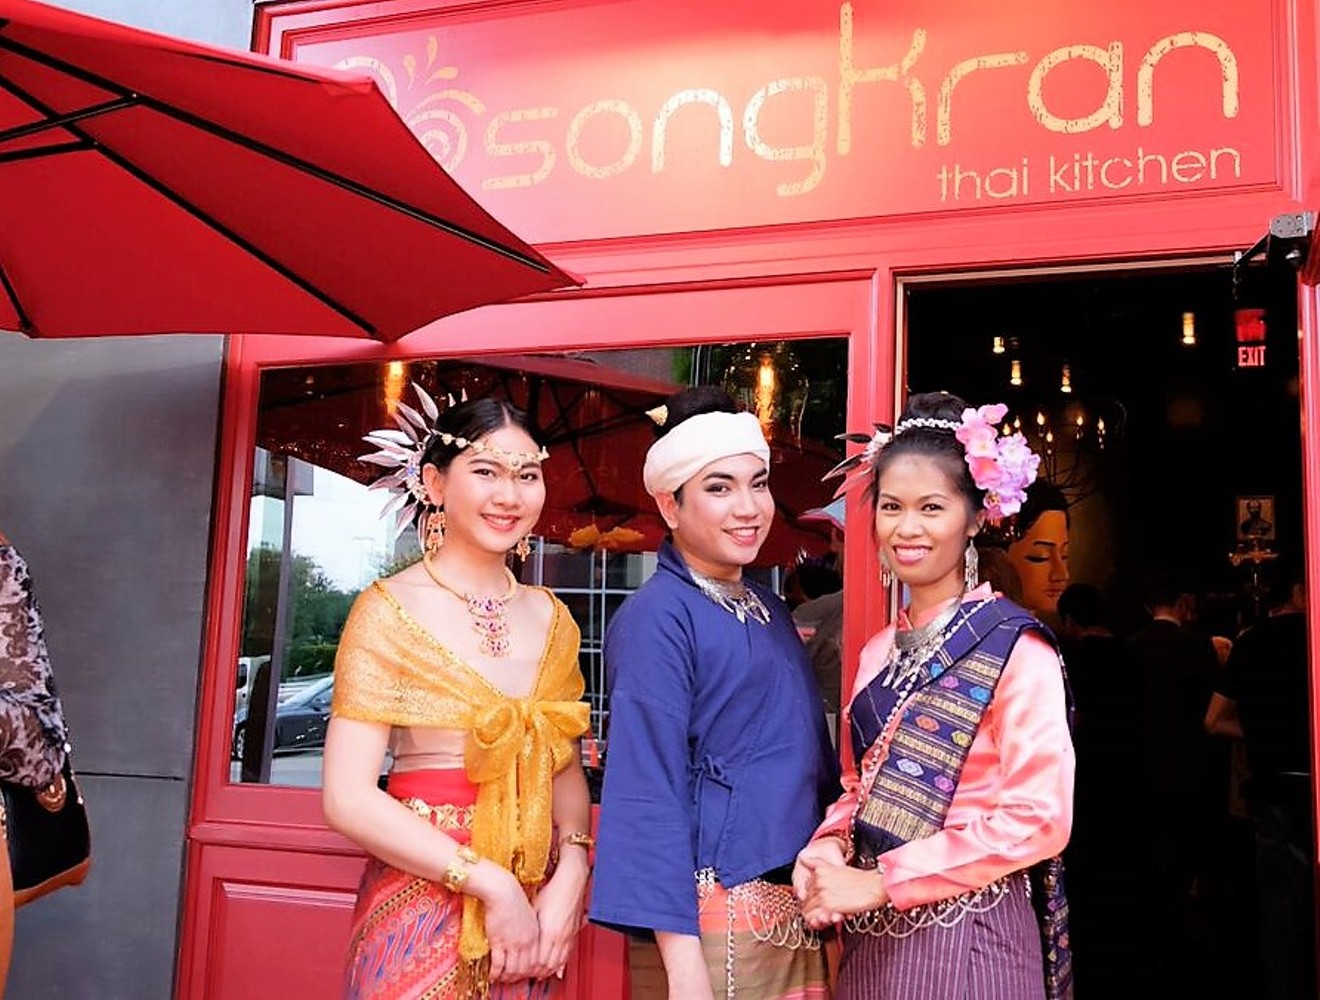 The dancers from Wat Buddhavas of Houston will perform for diners during the Songkran Festival.